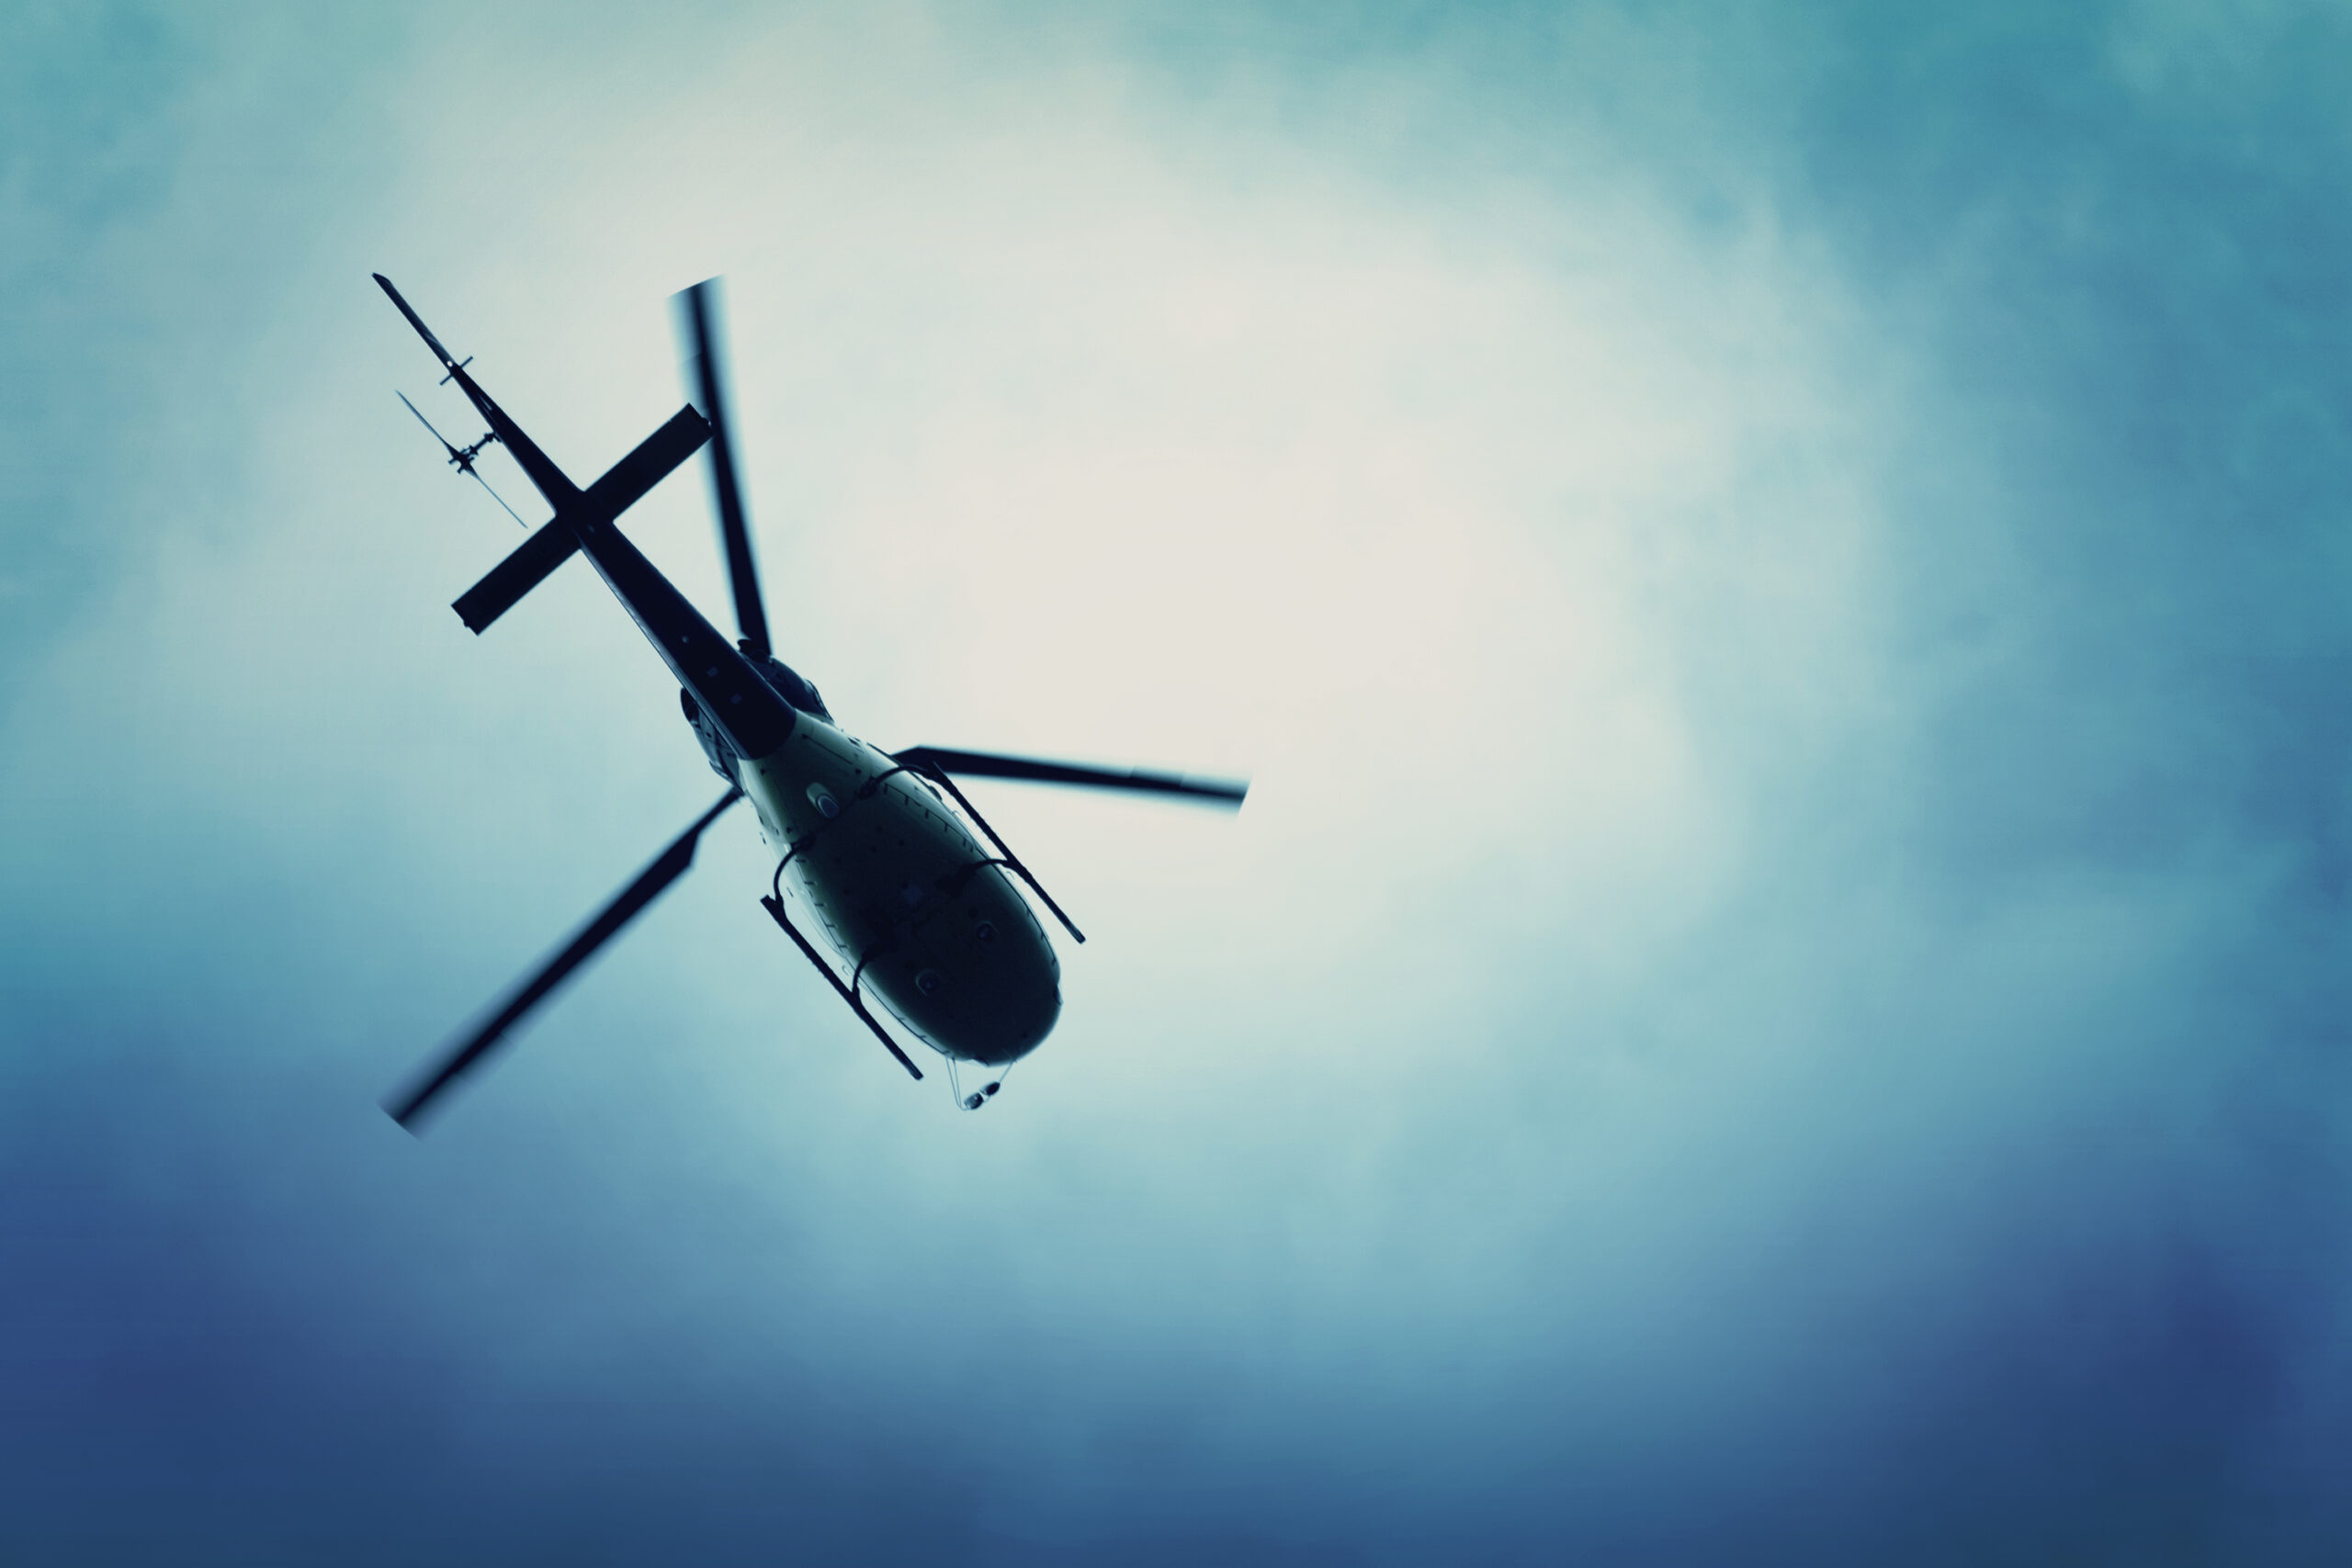 Helicopter flying in the blue sky. | Source: Shutterstock